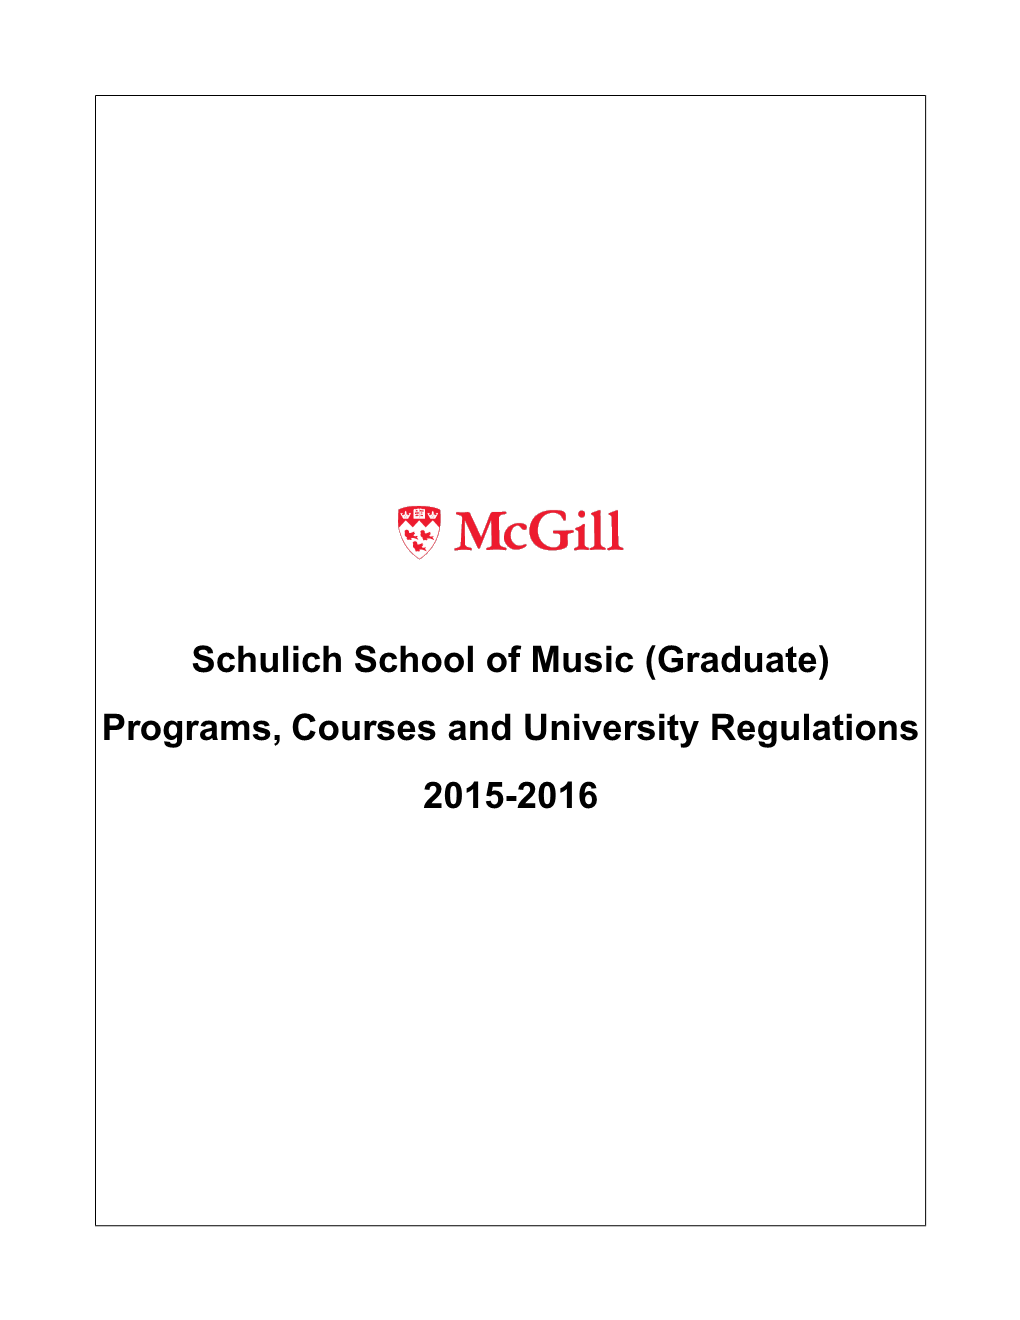 Schulich School of Music (Graduate) Programs, Courses and University Regulations 2015-2016